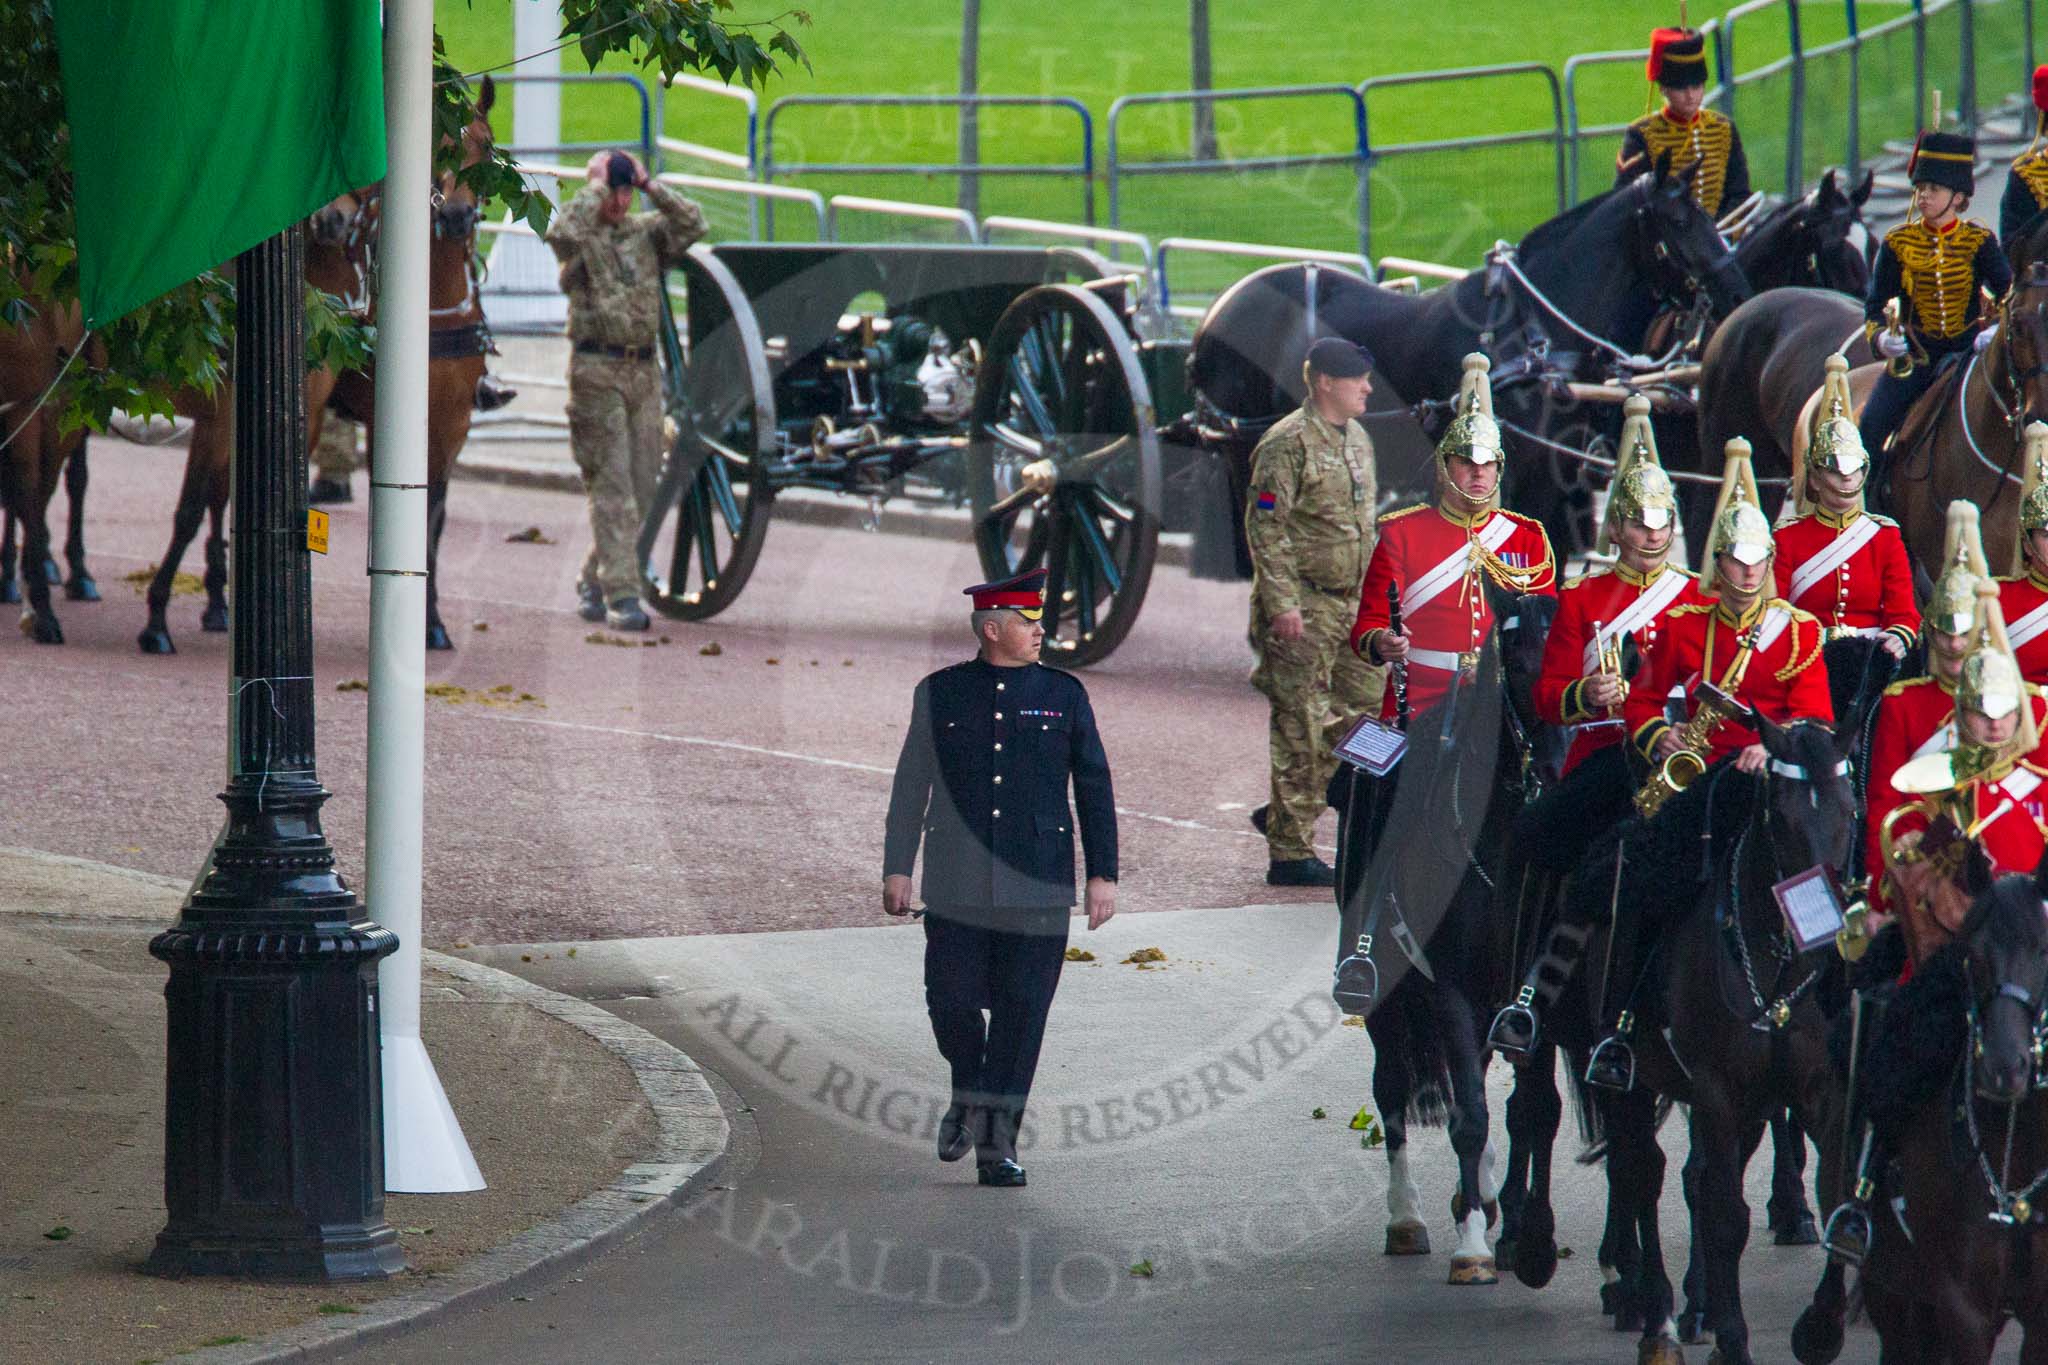 Beating Retreat 2014.
Horse Guards Parade, Westminster,
London SW1A,

United Kingdom,
on 11 June 2014 at 20:41, image #157